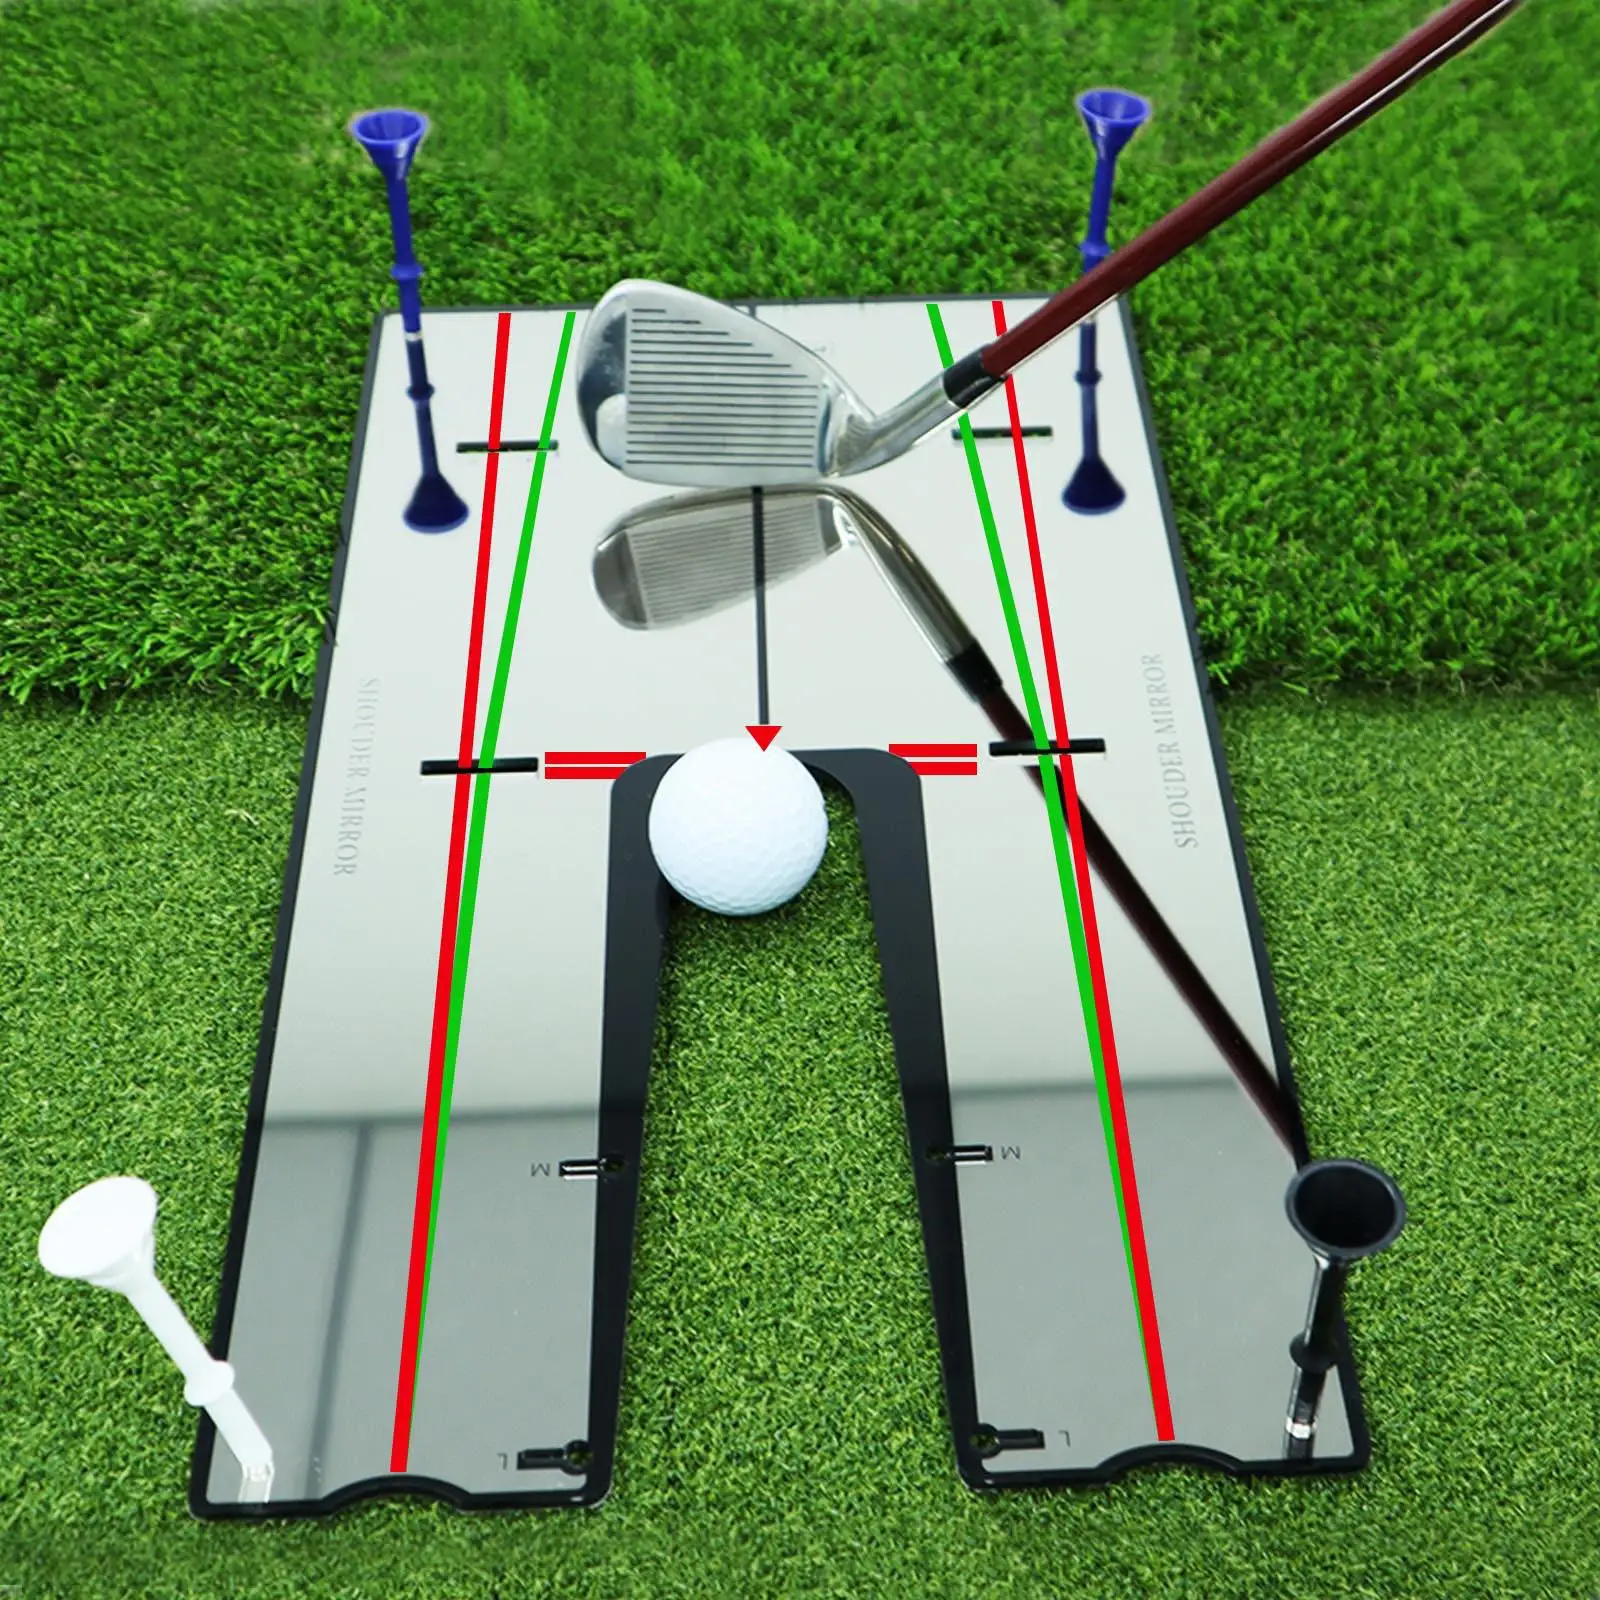 Golf Putting Mirror Alignment Large Practice Training Trainer Portable for Backyard Indoor Outdoor Office Home Putting Practice